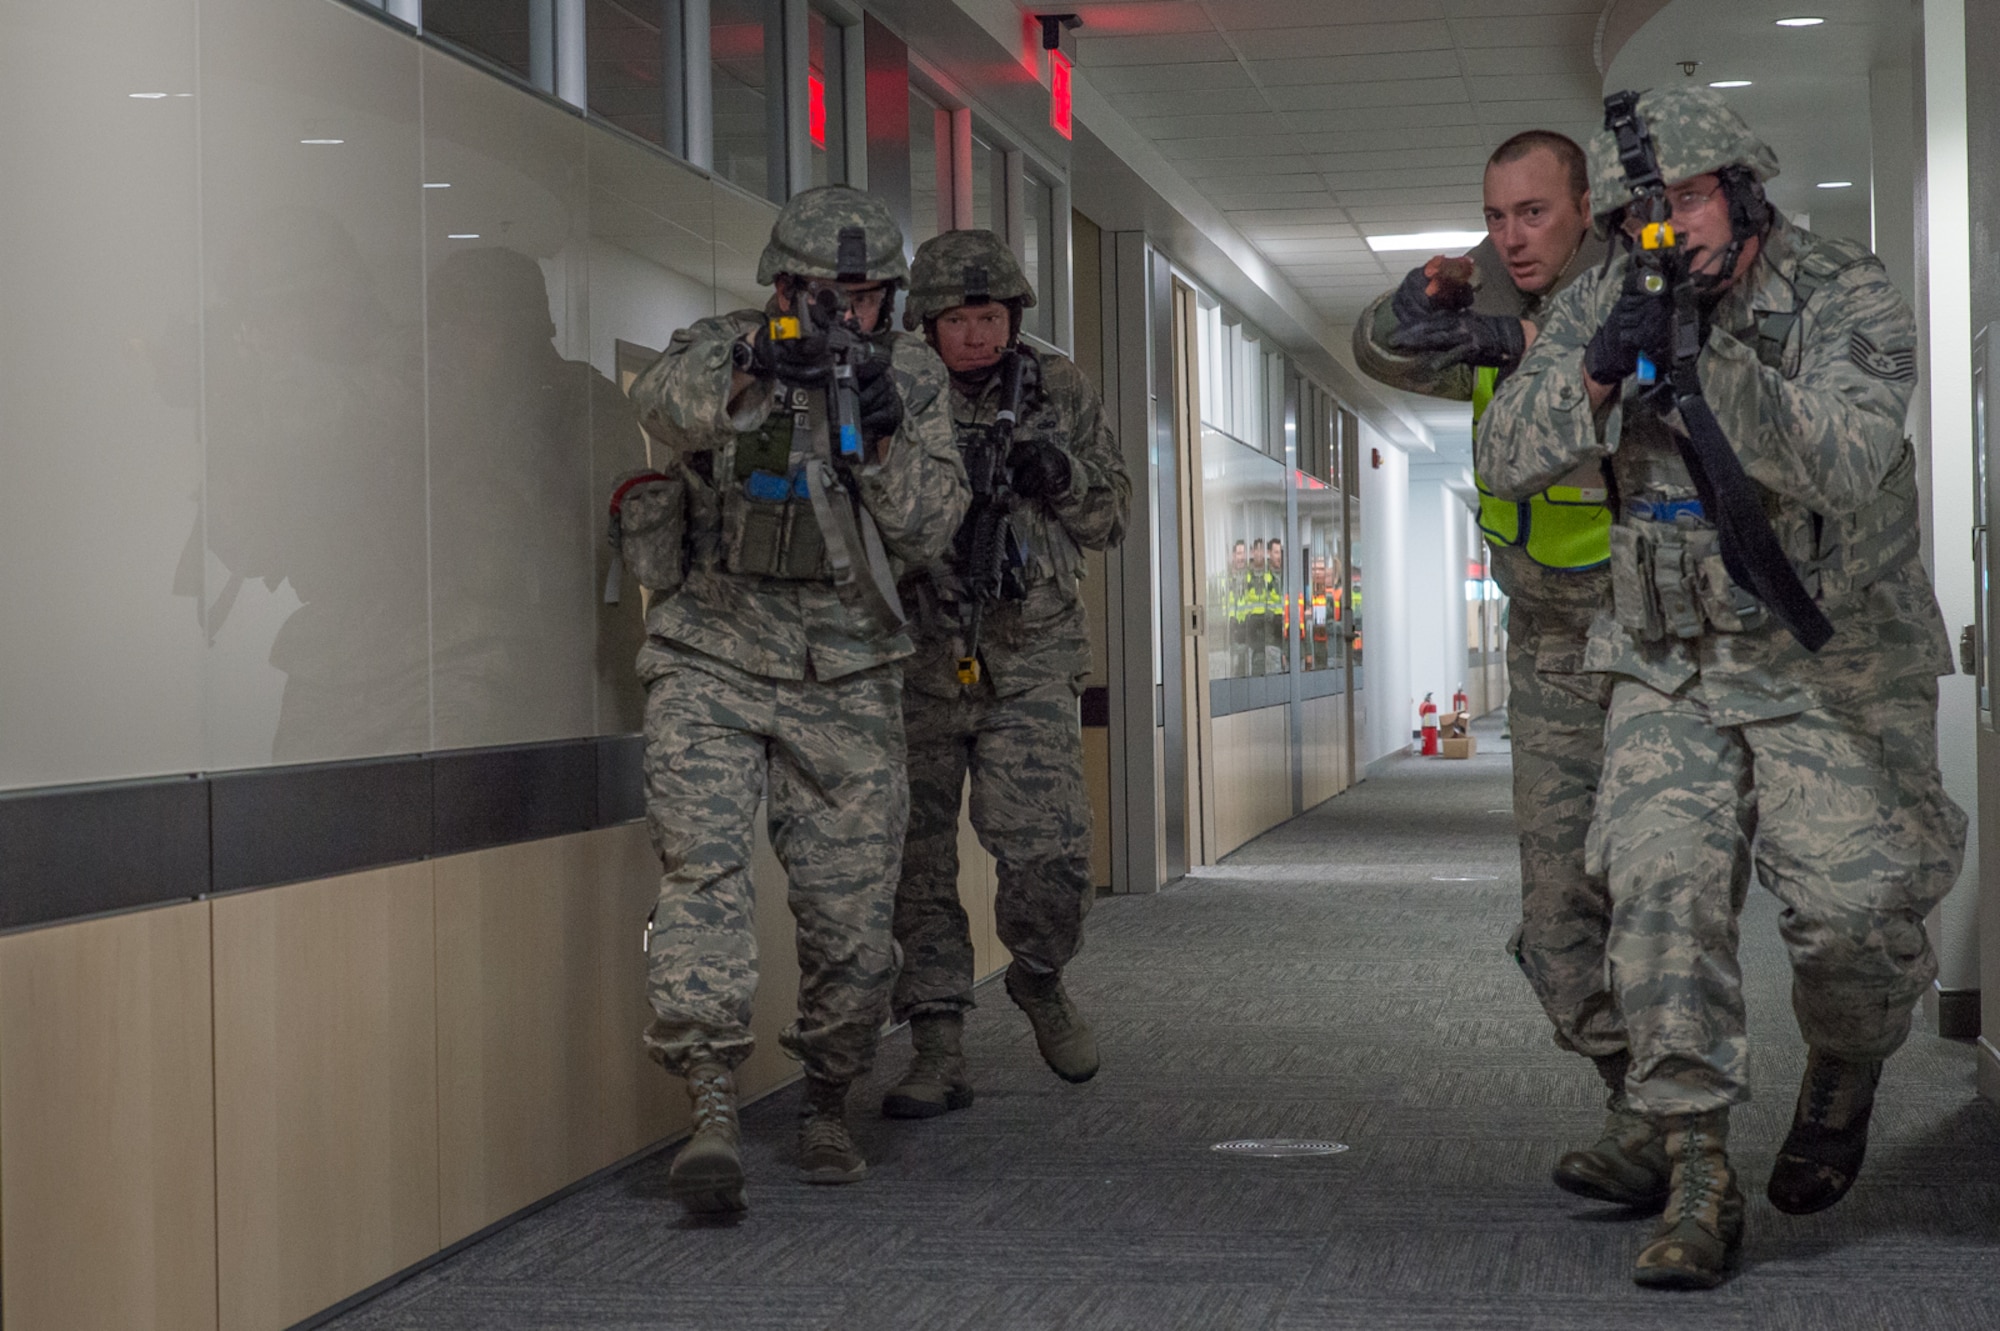 U.S. Air Force Airmen assigned to the 153rd Security Forces Squadron clear a room in the headquarters building Dec. 18, 2015 at Cheyenne Air National Guard base in Cheyenne, Wyoming. The Airmen sweep the building looking for additional gunmen as part of an active shooter exercise. The scenario was in support of memorandum sent by Secretary of the Air Force Deborah James to test lockdown and active shooter procedures in response to shootings in Chattanooga, Tenn. (U.S. Air National Guard photo by Master Sgt. Charles Delano)